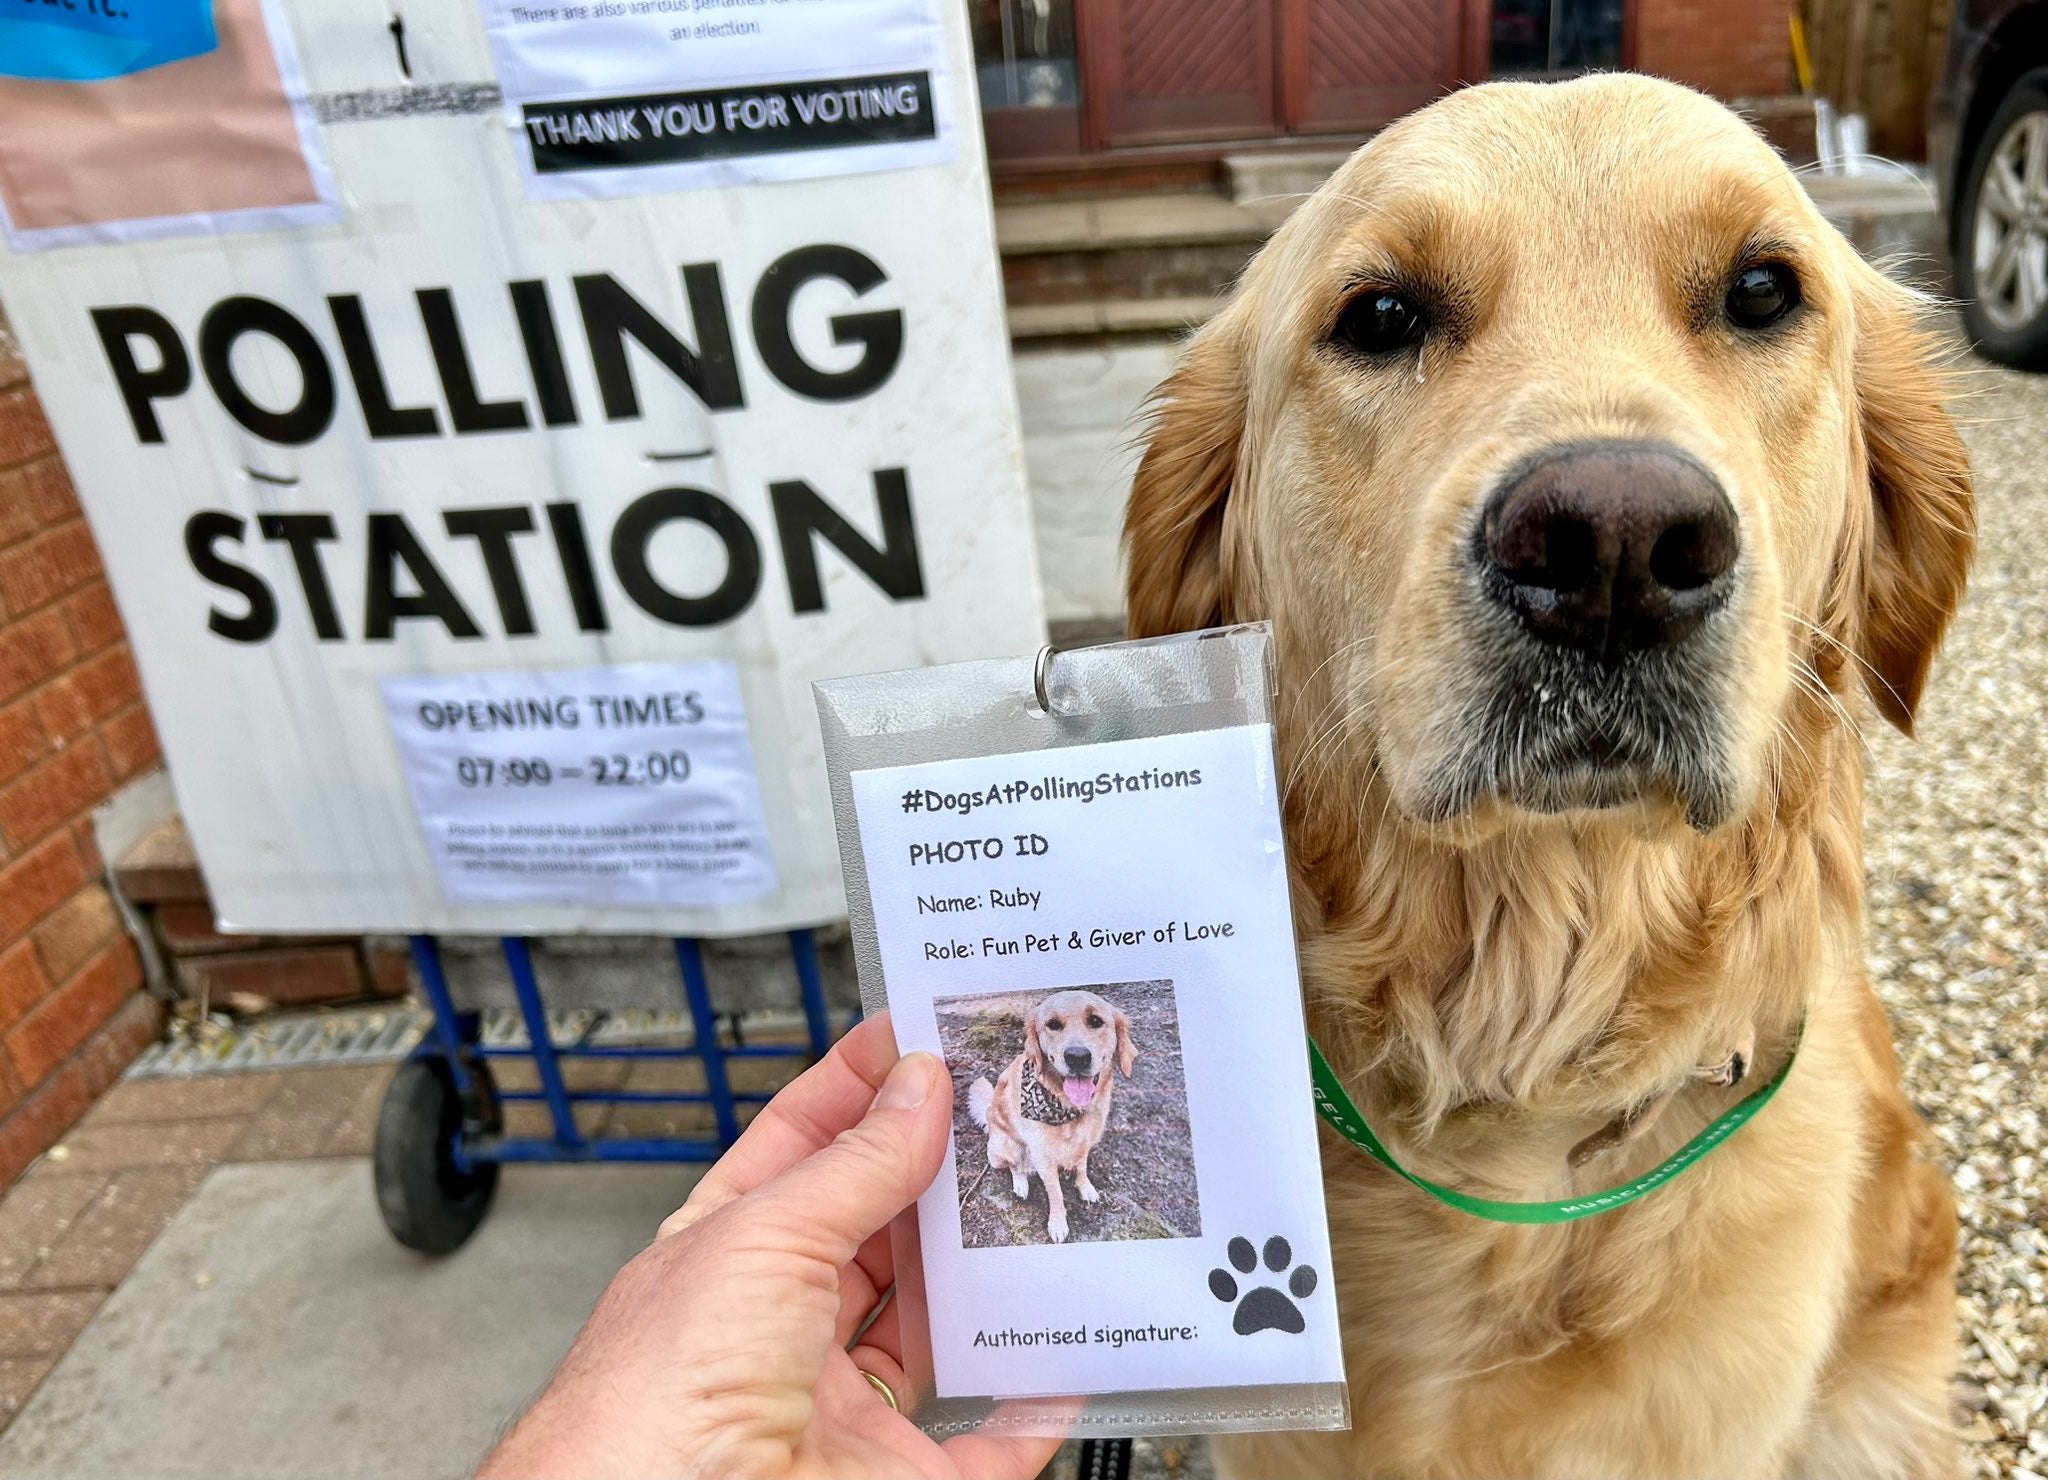 Handout photo issued by Annette Hill who made her dog Ruby her own photo ID, complete with name, photo, and an "authorised signature" of a paw print